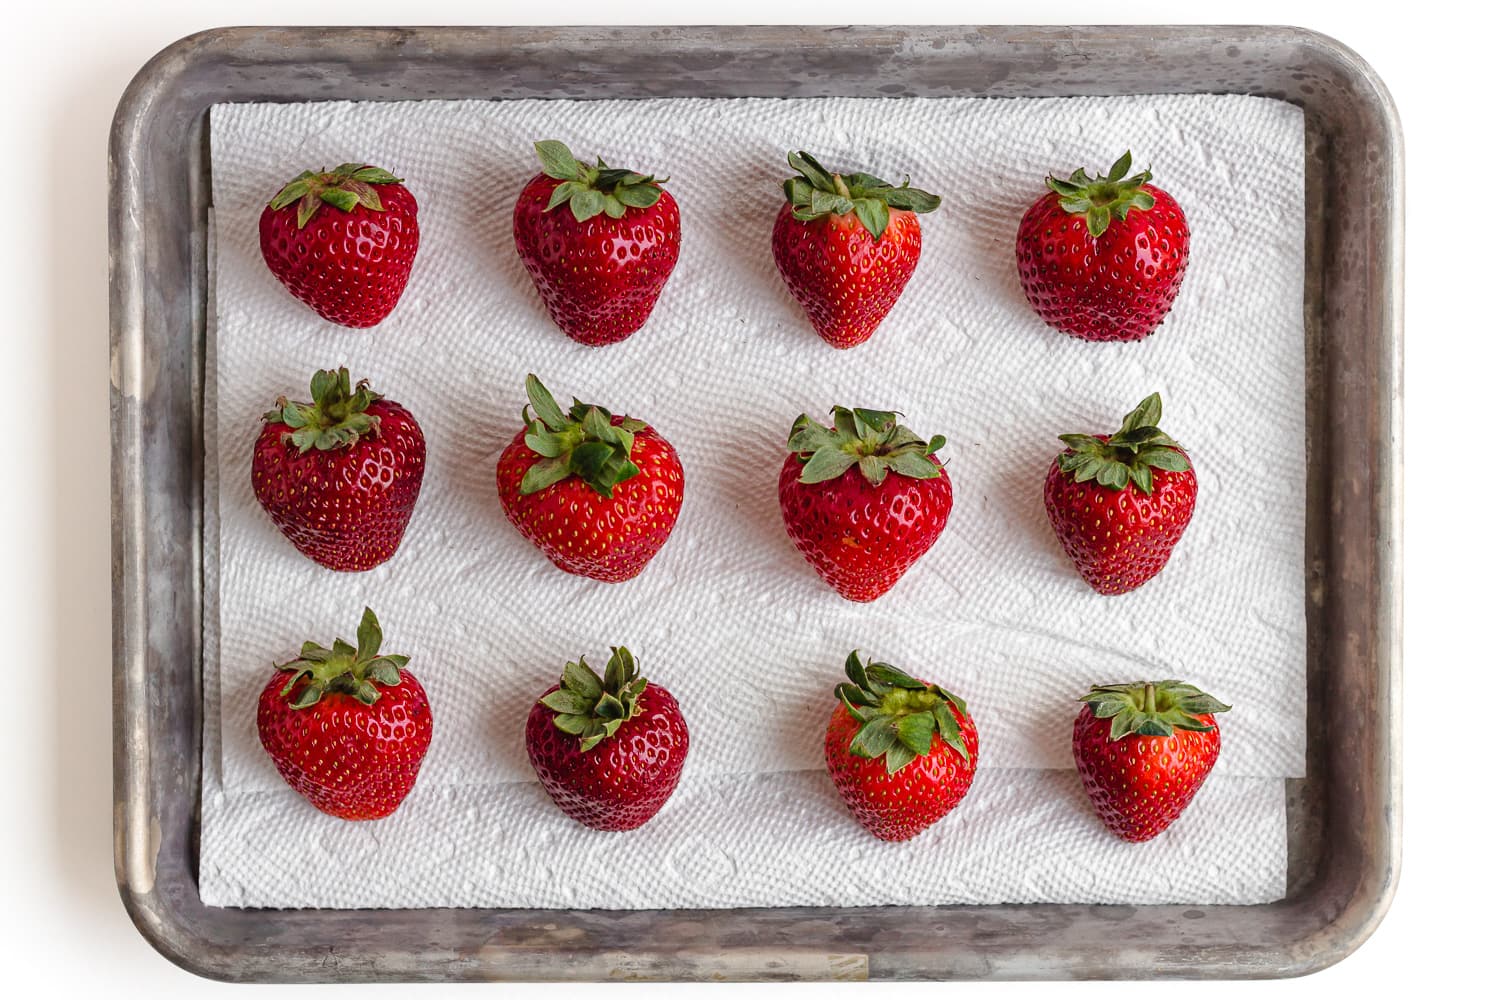 Washed and dried strawberries set out on a tray lined with paper towel.